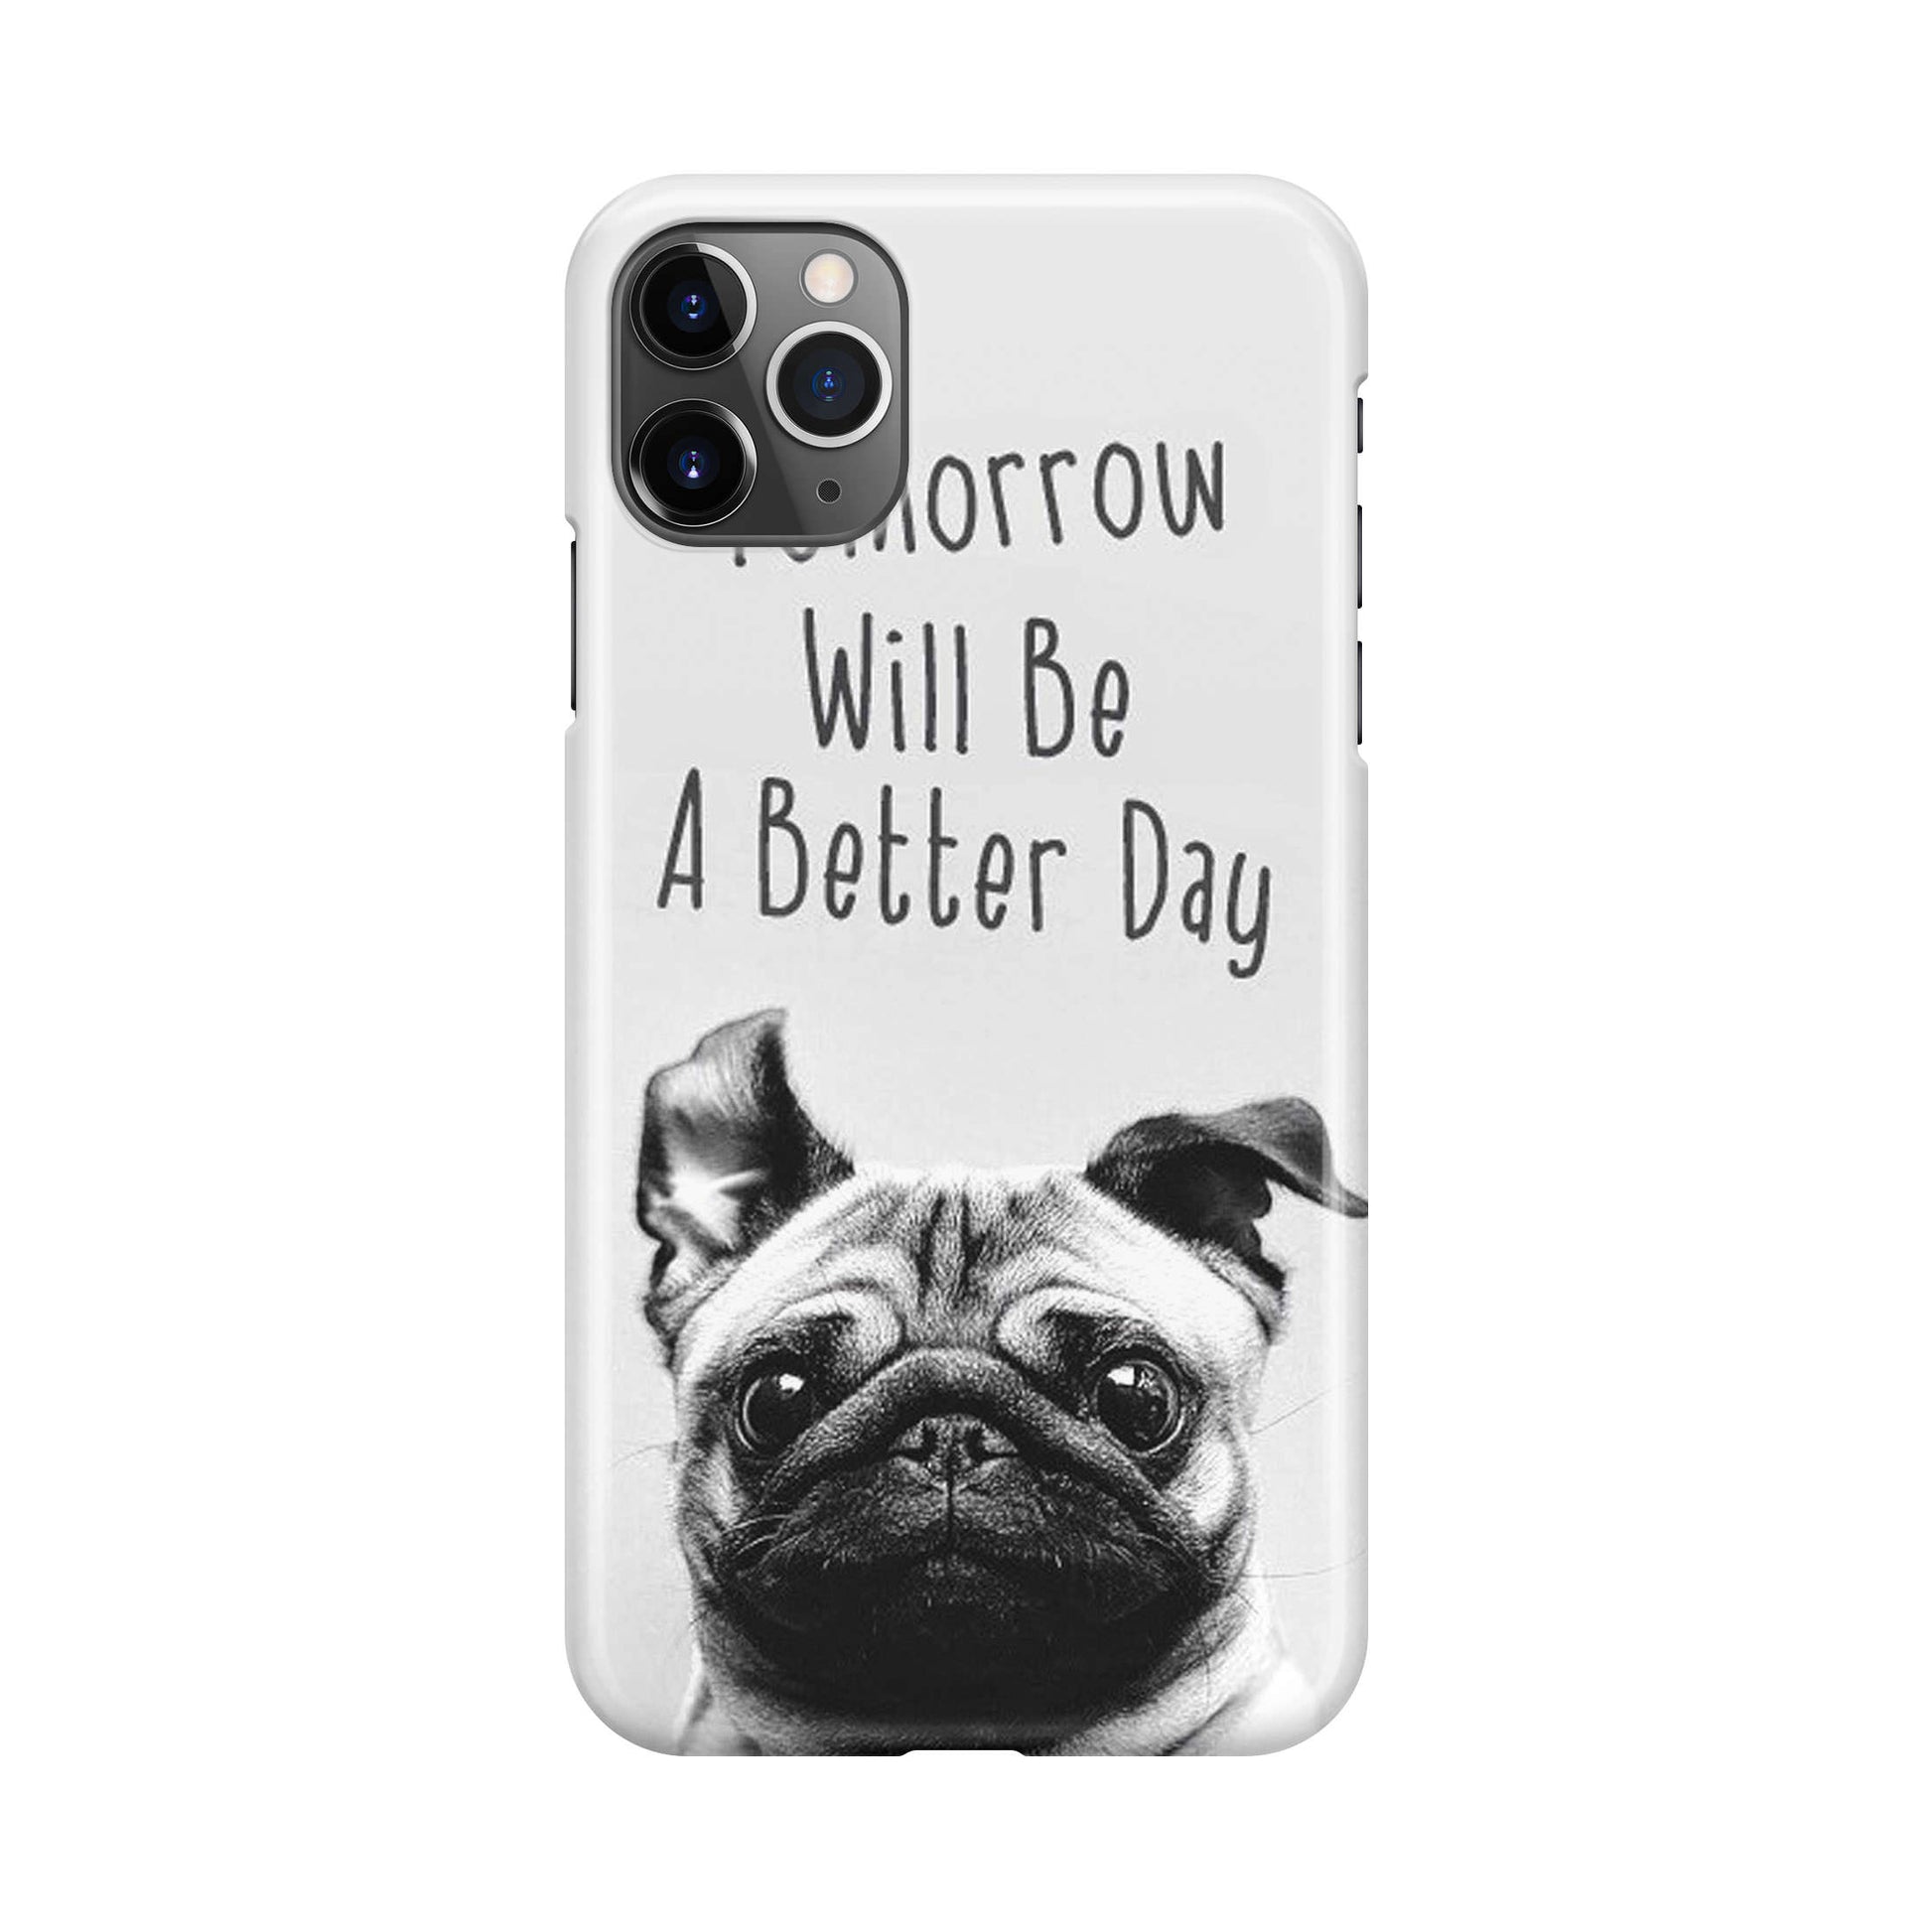 Tomorrow Will Be A Better Day iPhone 11 Pro Max Case